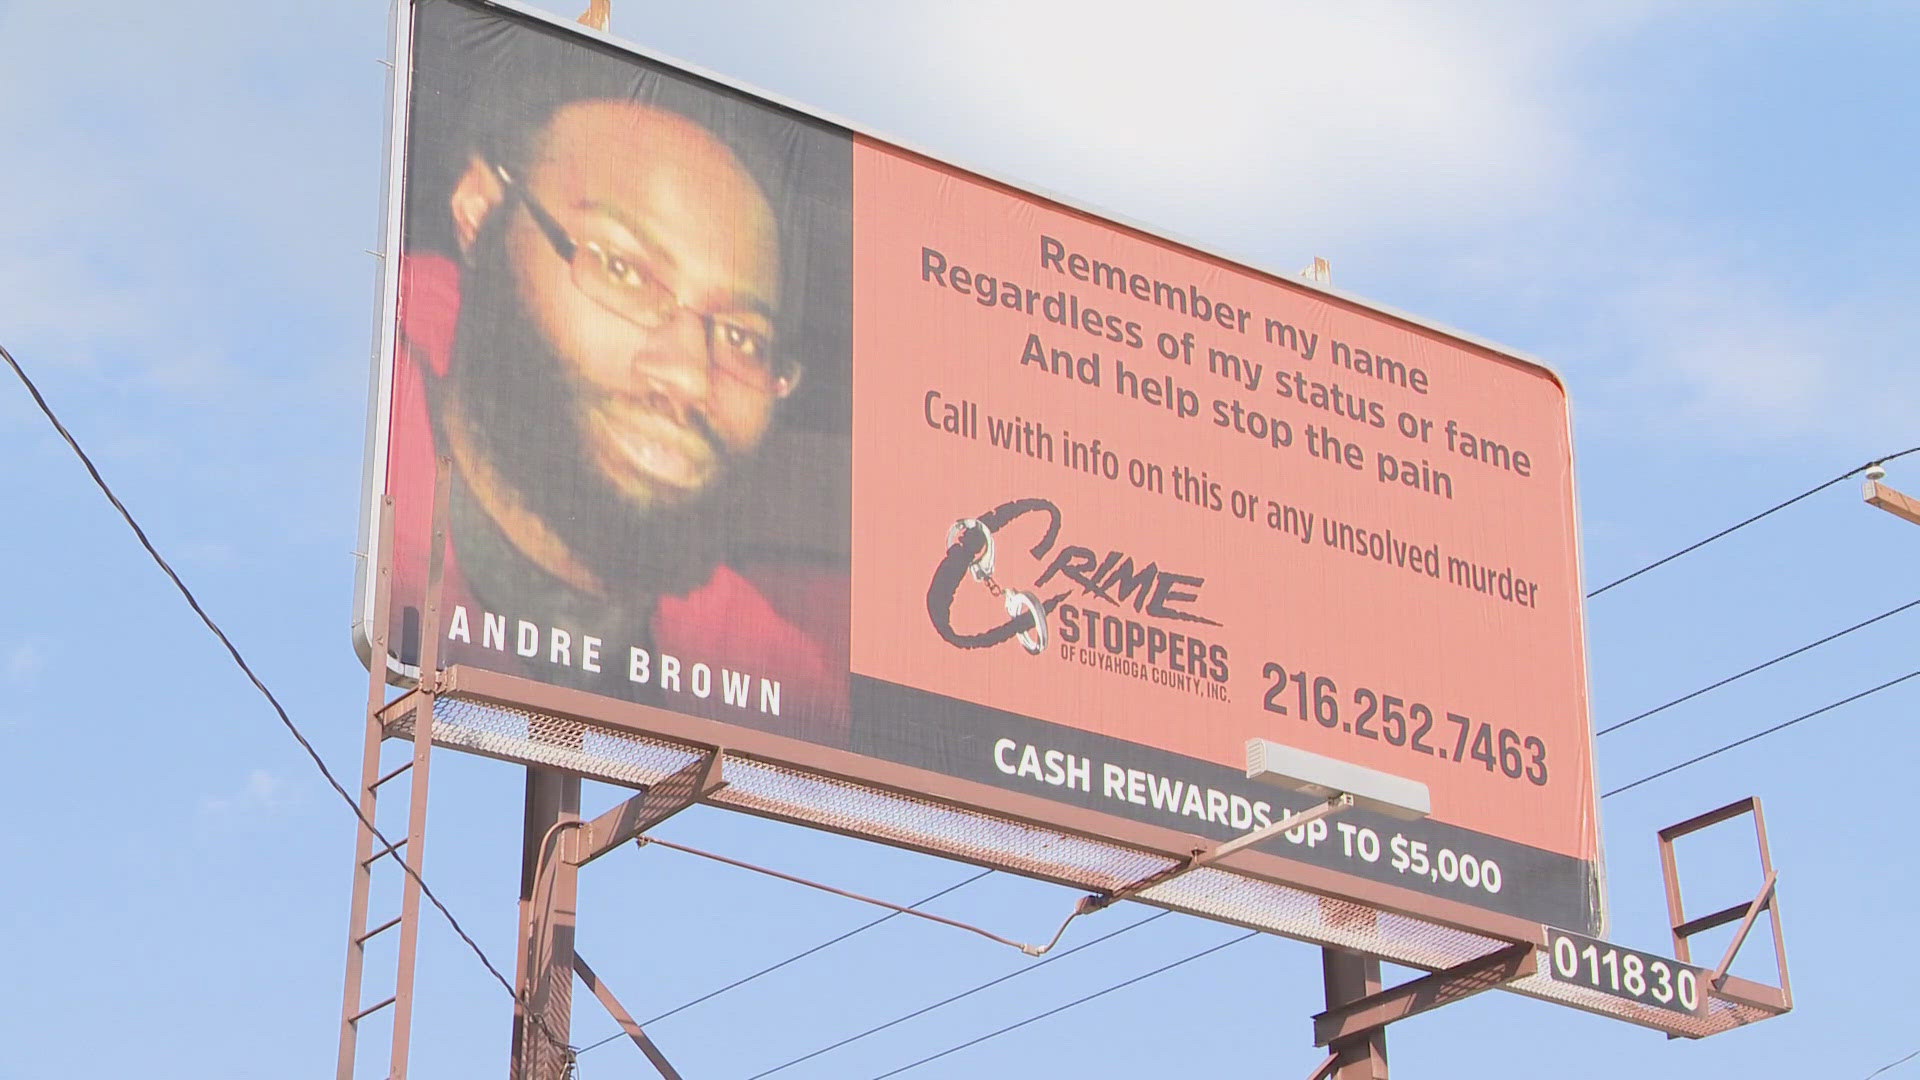 It’s been five years since Andre Brown was sitting in a car with a friend near the corner of Stevenson Road and St. Clair Avenue in Cleveland when they were shot.